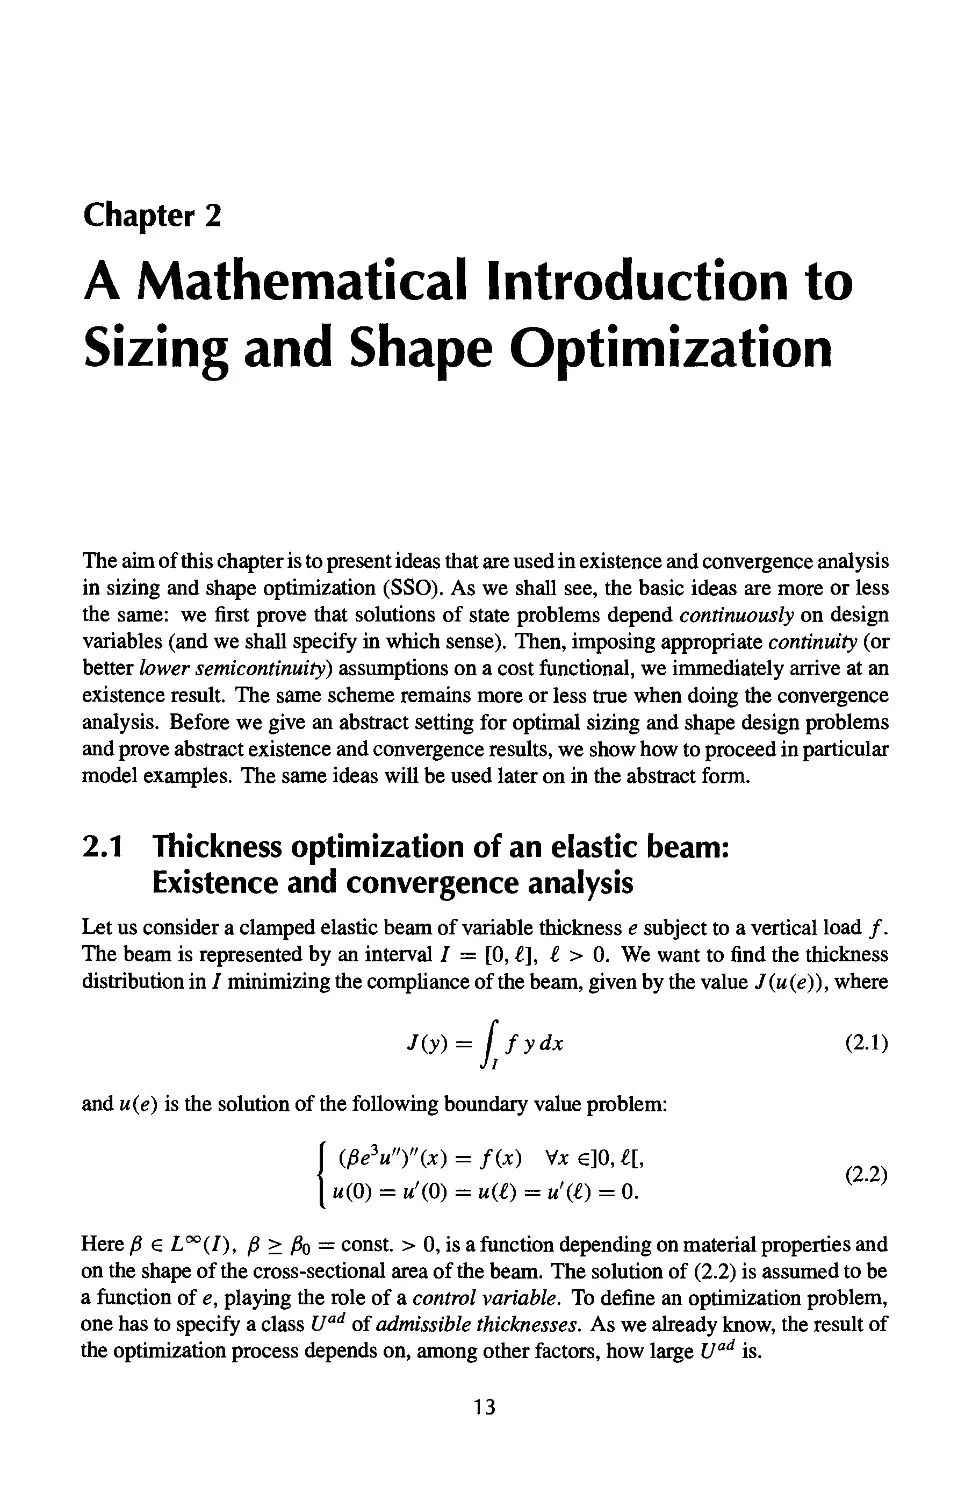 2 A Mathematical Introduction to Sizing and Shape Optimization